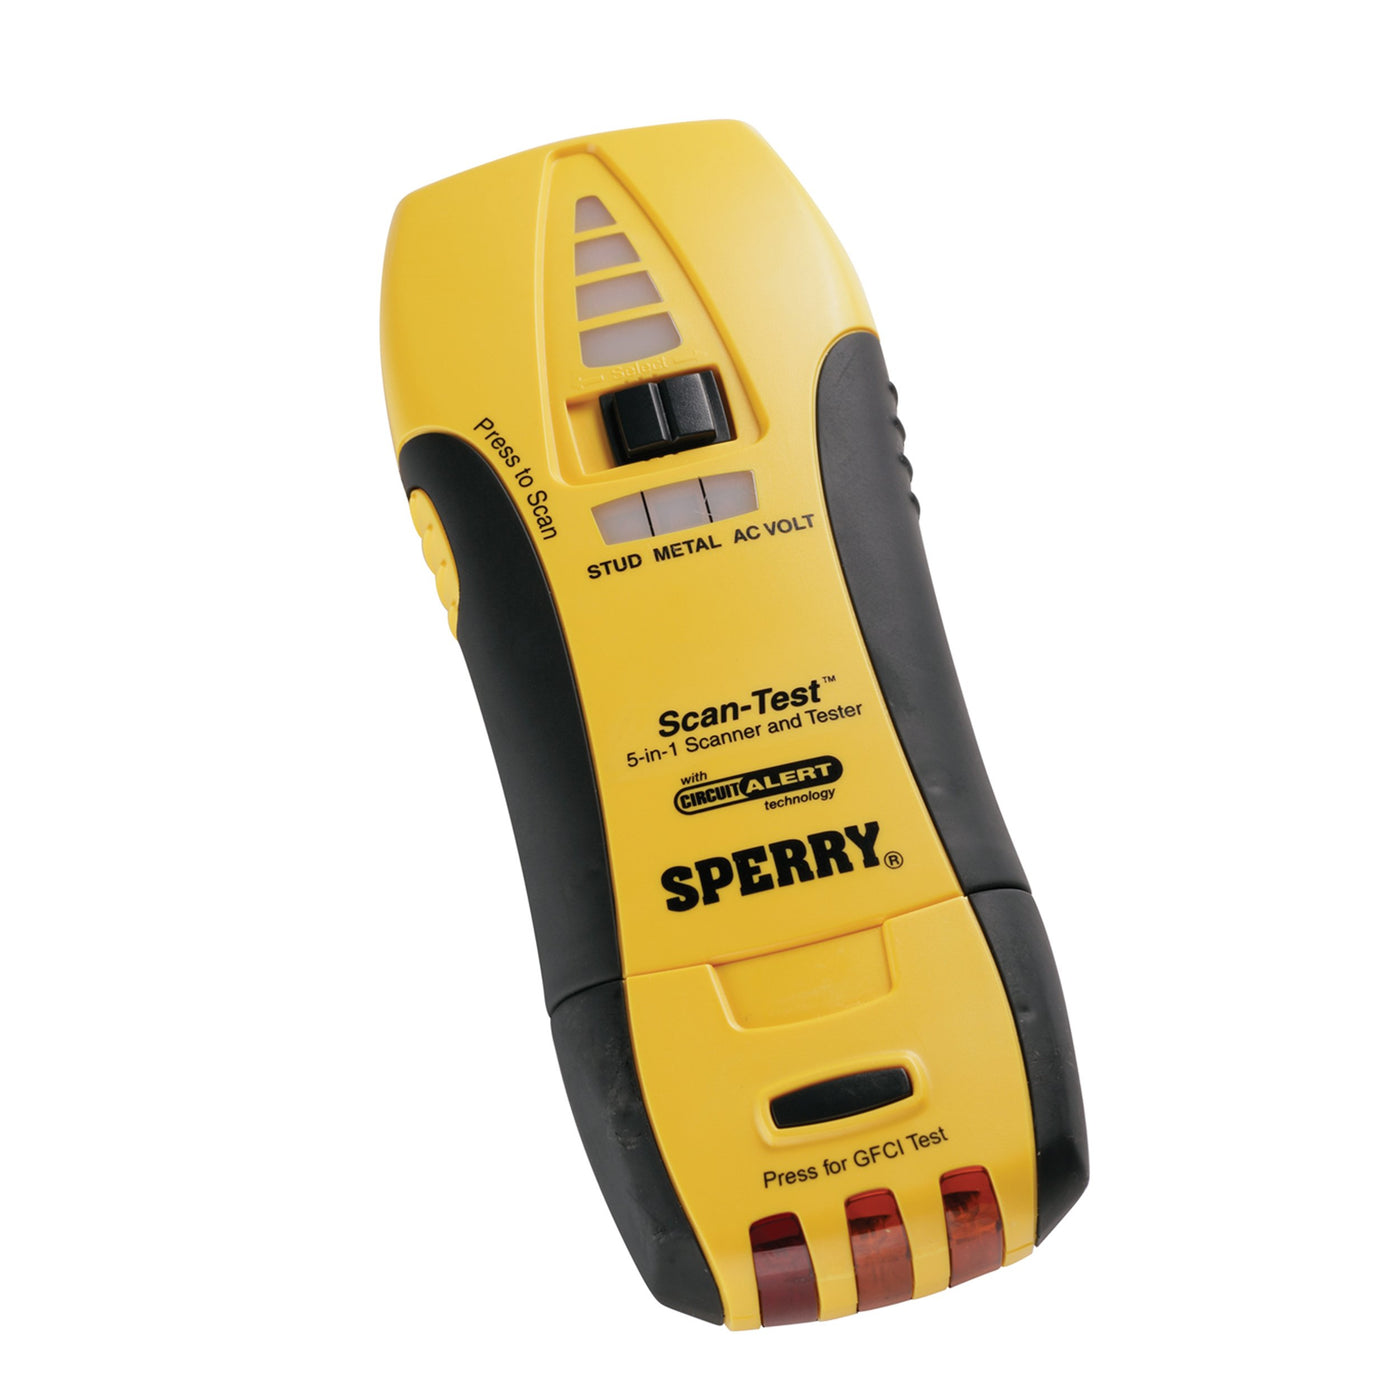 Sperry Instruments PD6902 ScanTest Multi-Scanner & Tester